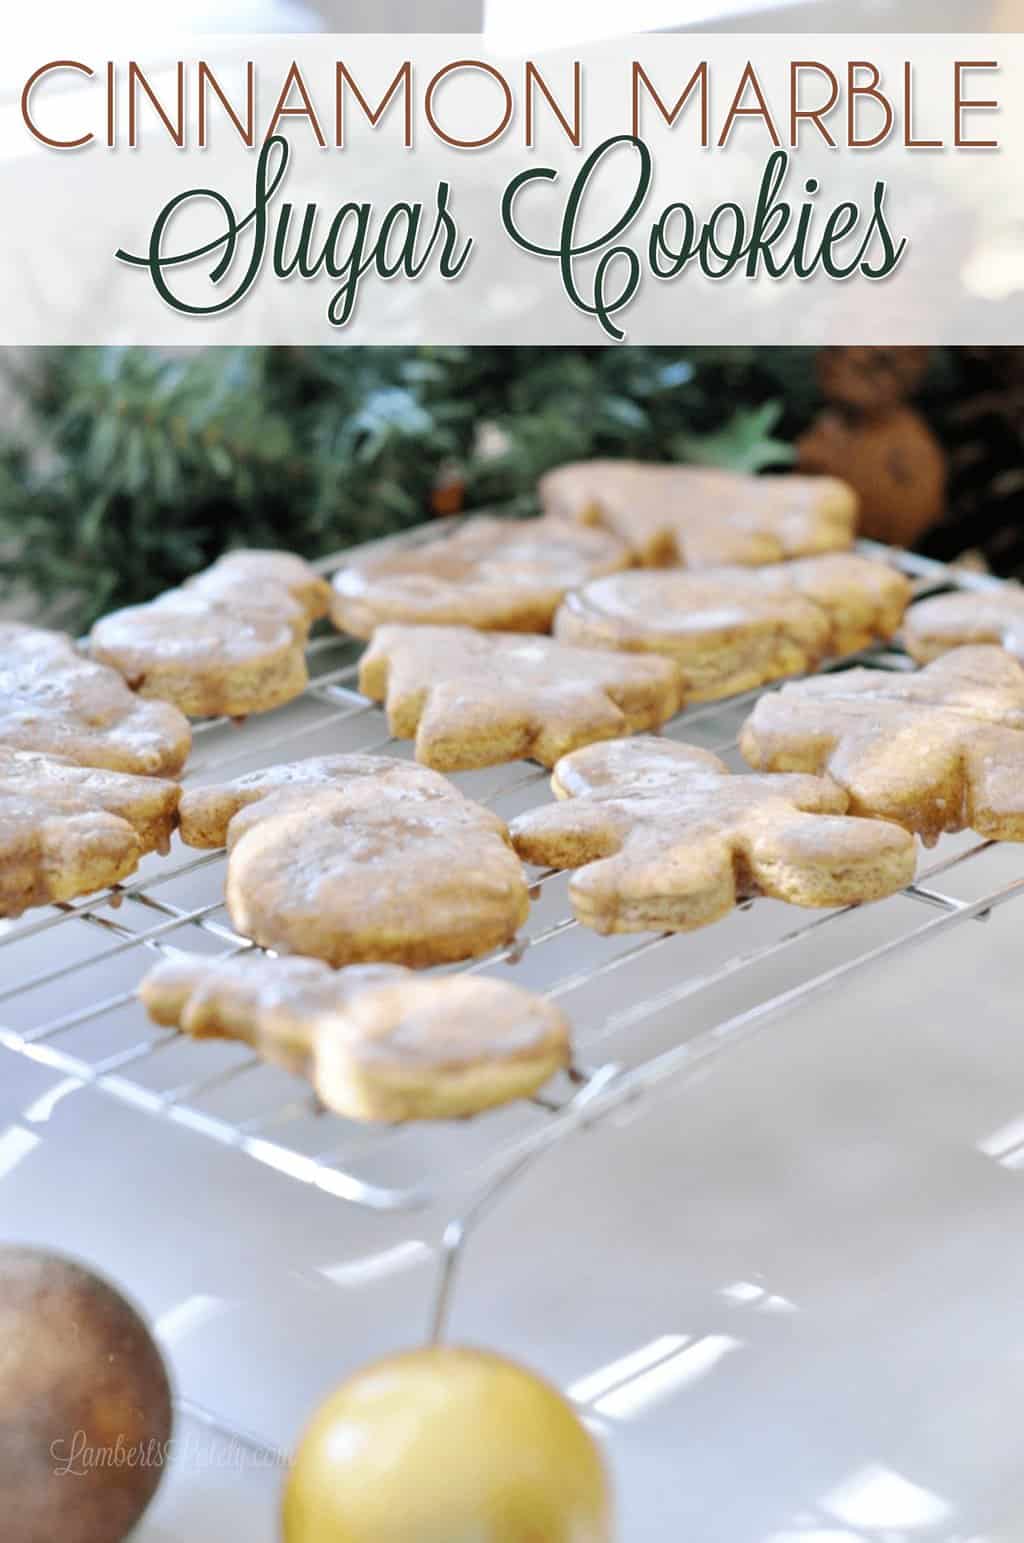 This fun twist on the traditional cut out sugar cookie recipe gives them a cream cheese cinnamon swirl...tastes amazing with the cinnamon sugar icing! These are great for Christmas baking.